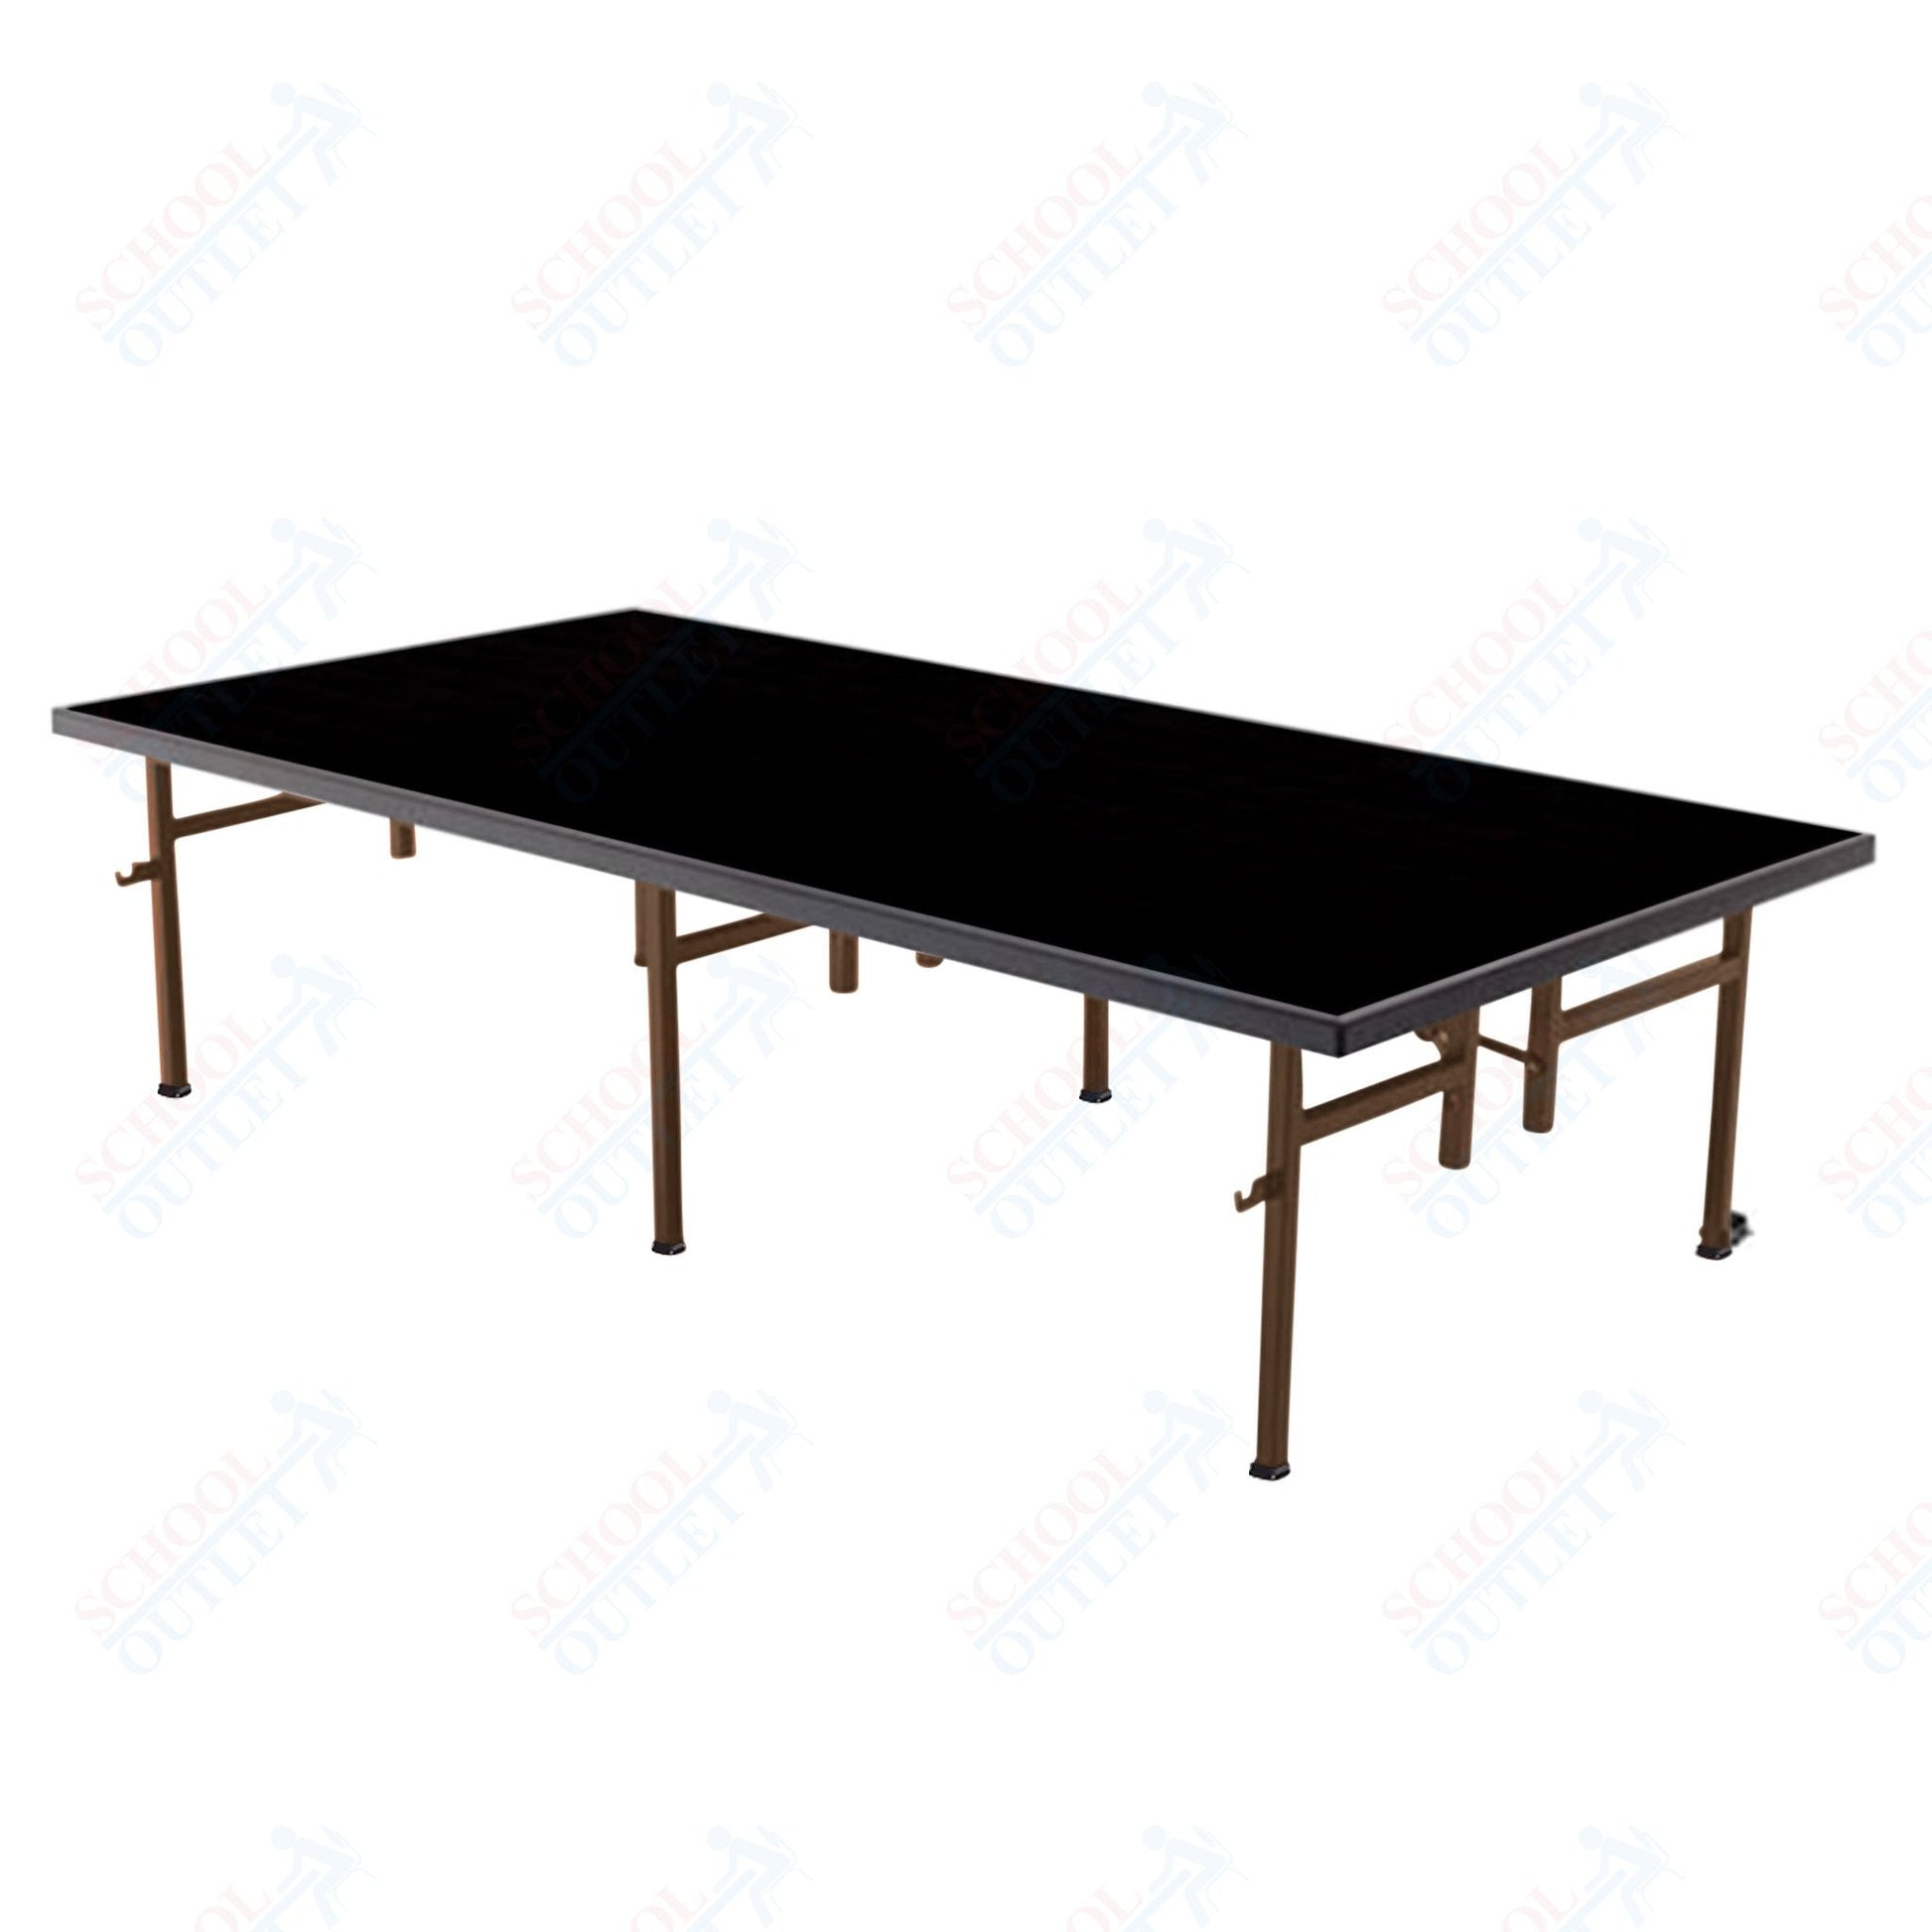 AmTab Fixed Height Stage - Polypropylene Top - 36"W x 96"L x 8"H (AmTab AMT - ST3808P) - SchoolOutlet